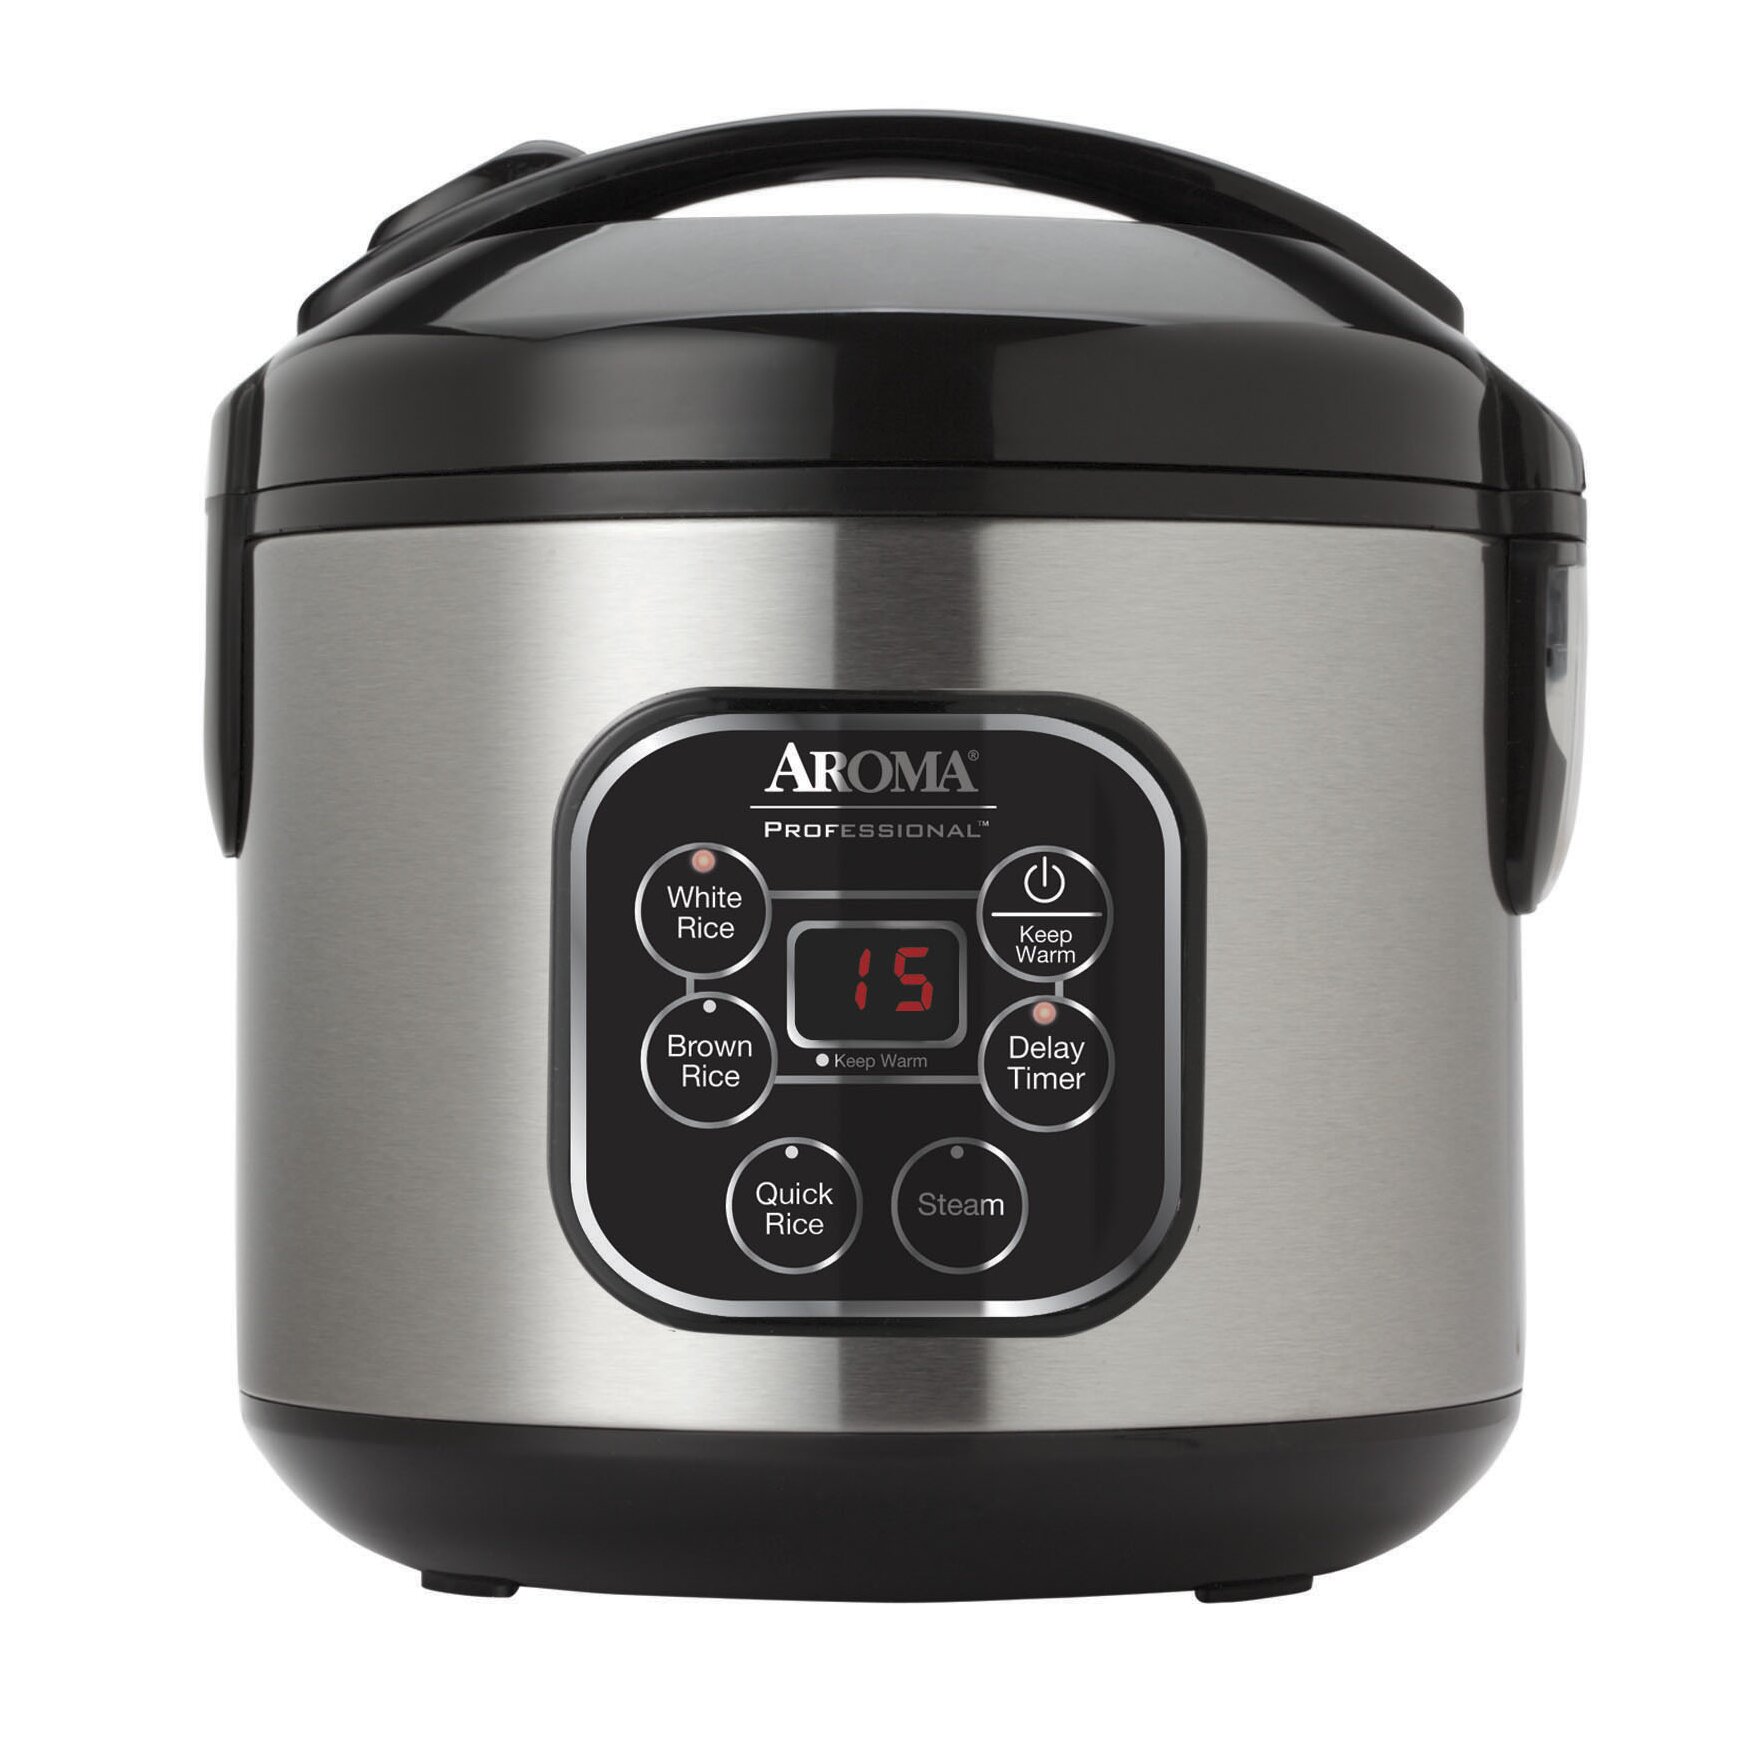 Aroma 8-Cup Cool Touch Rice Cooker | Wayfair